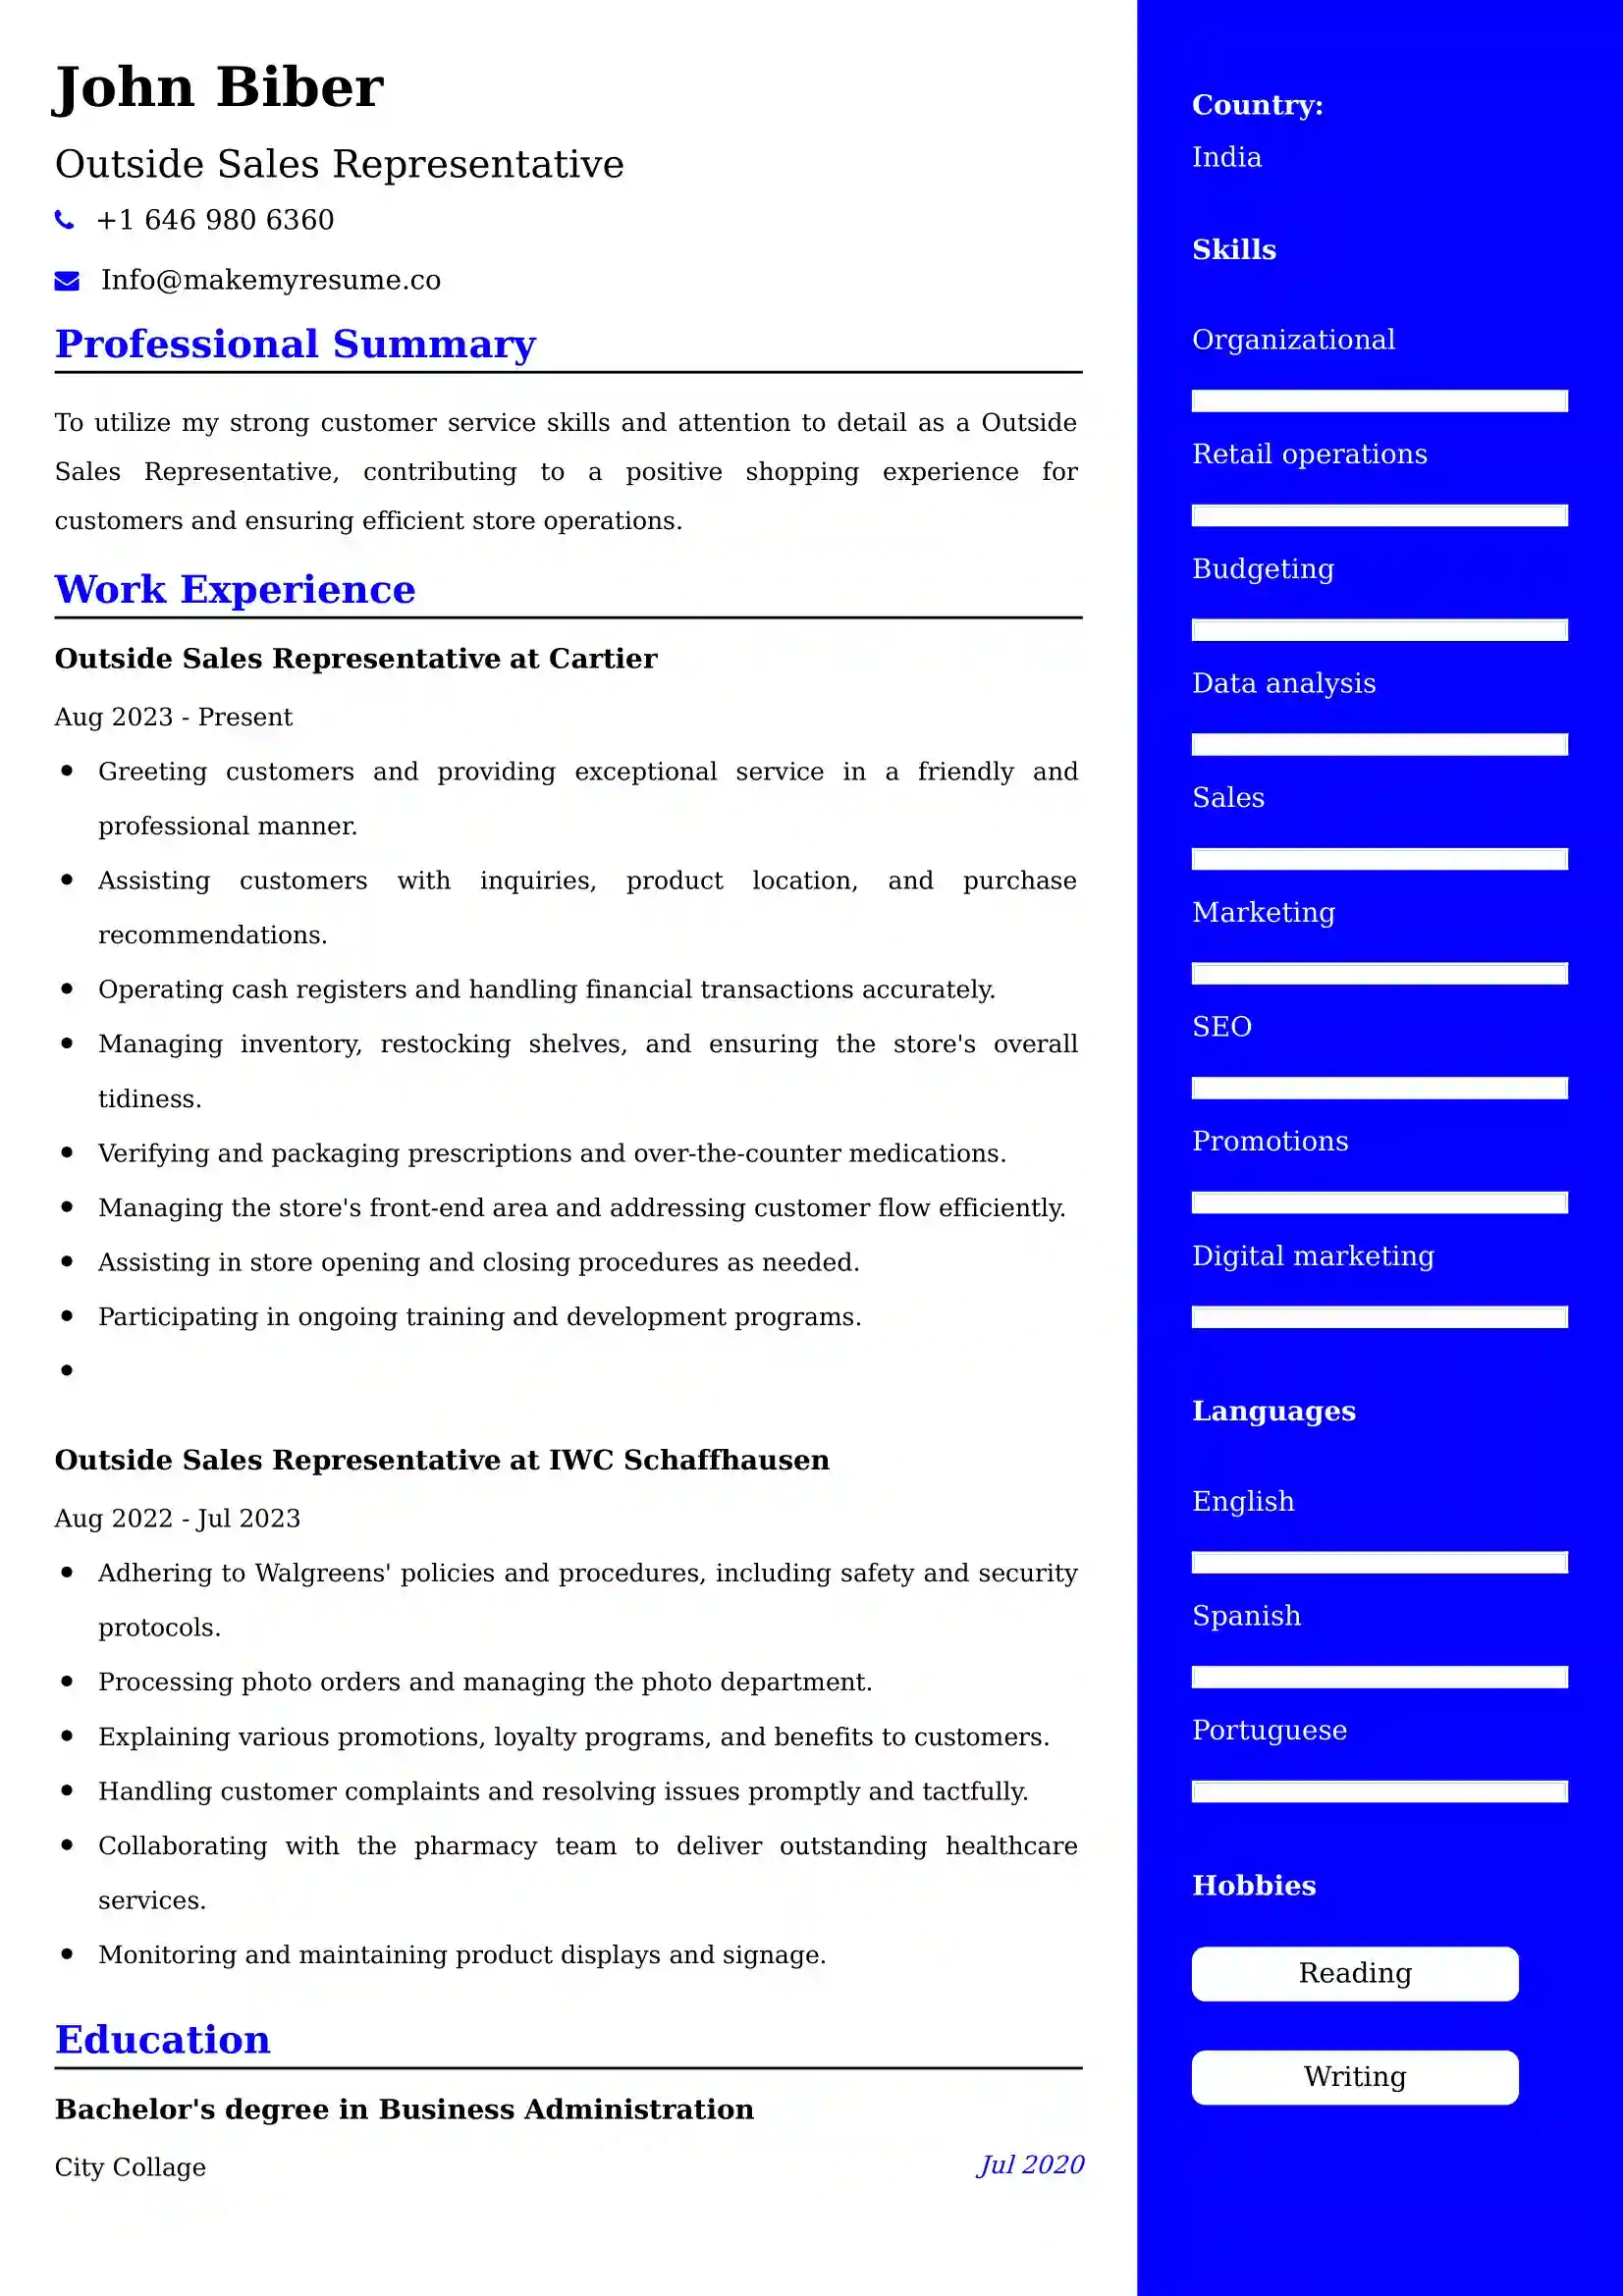 Best Outside Sales Representative Resume Examples for UK